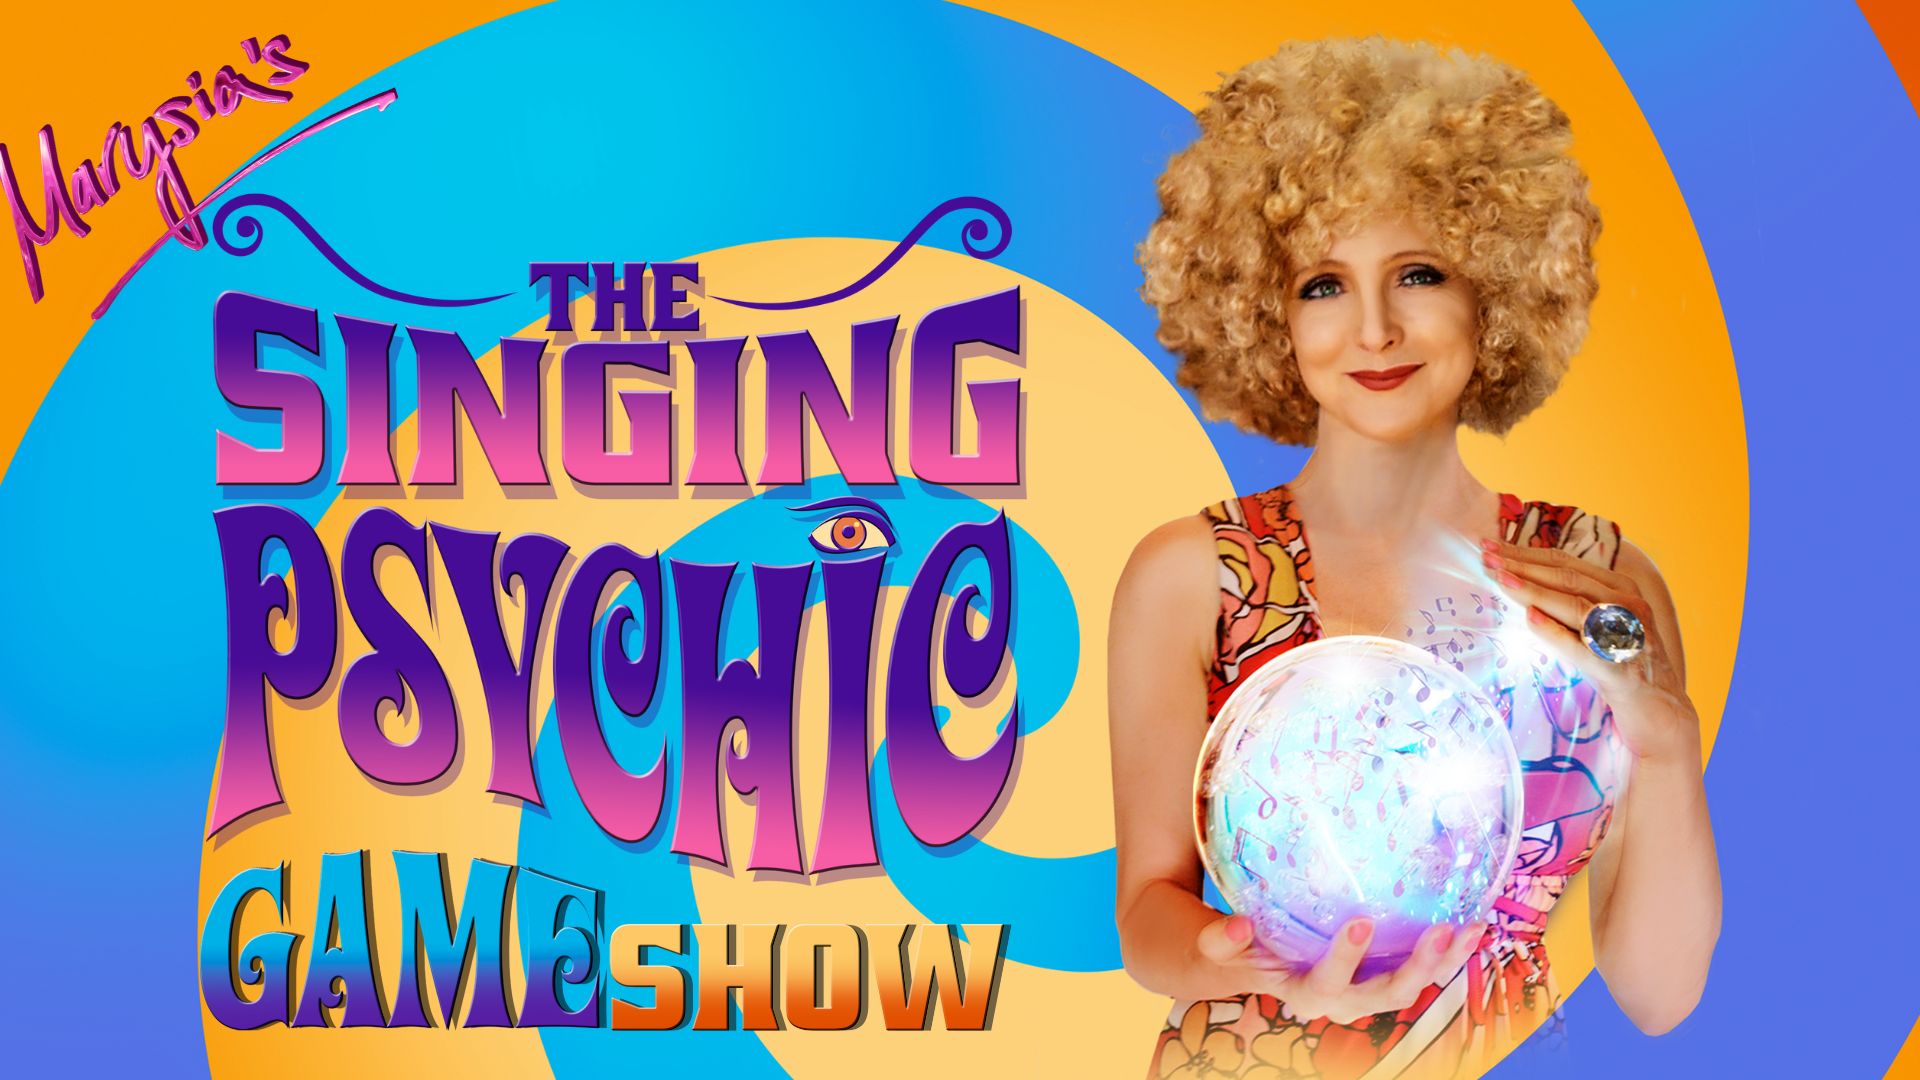 From London UK- The Singing Psychic Game Show